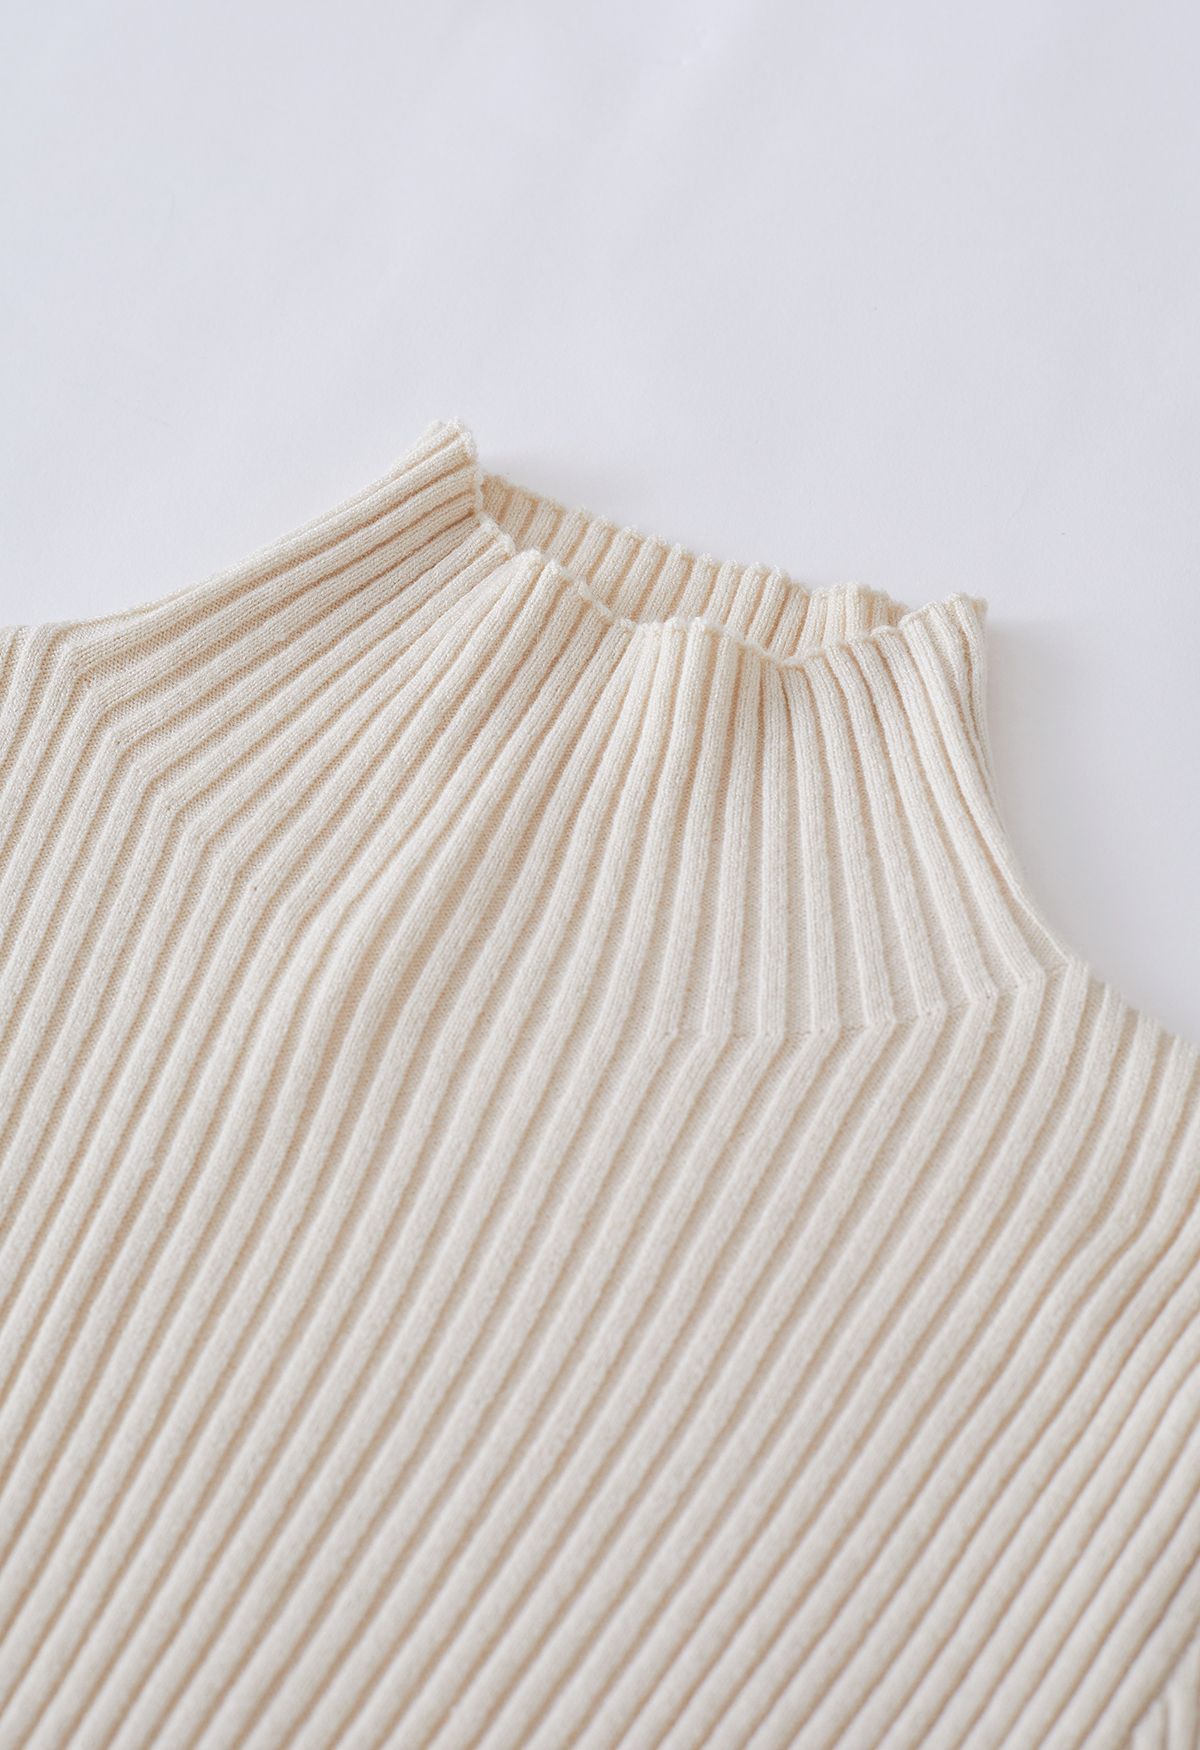 Mock Neck Ribbed Knit Twinset Top in Cream